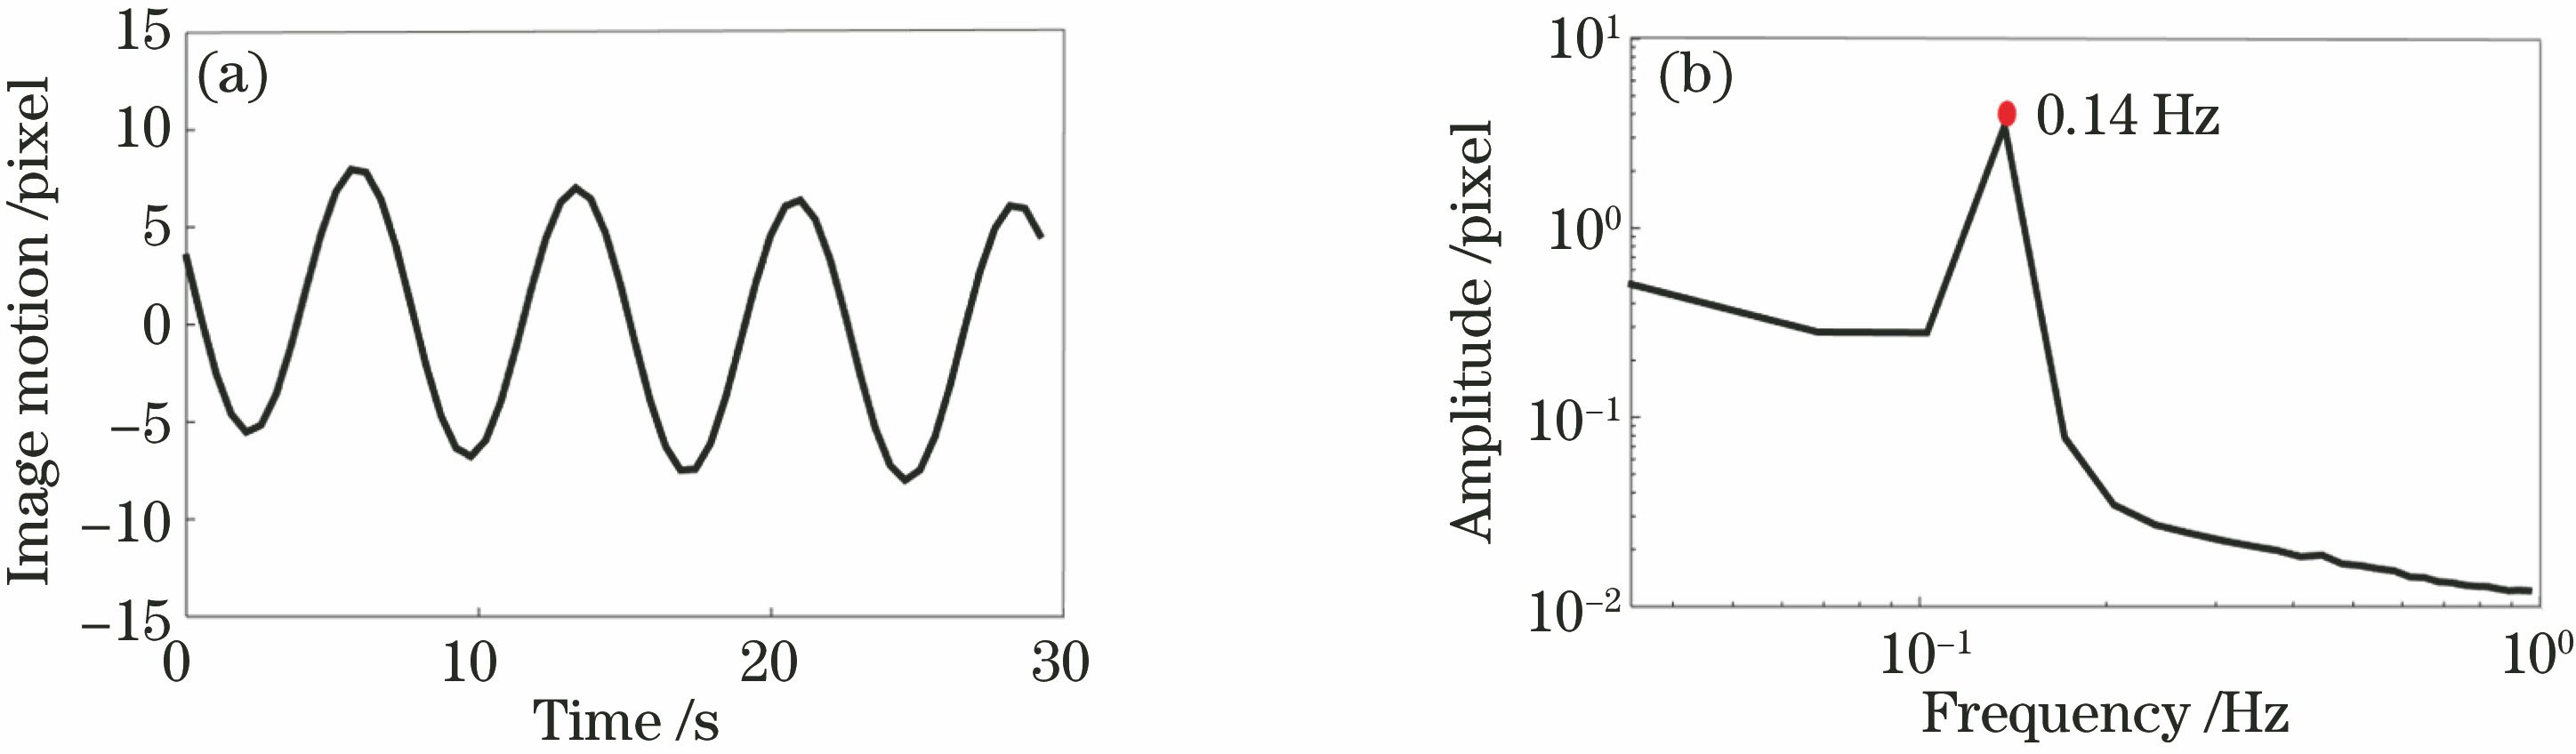 Image motion measurement results for XX-1 visible camera. (a) Time-domain curve; (b) amplitude-frequency curve